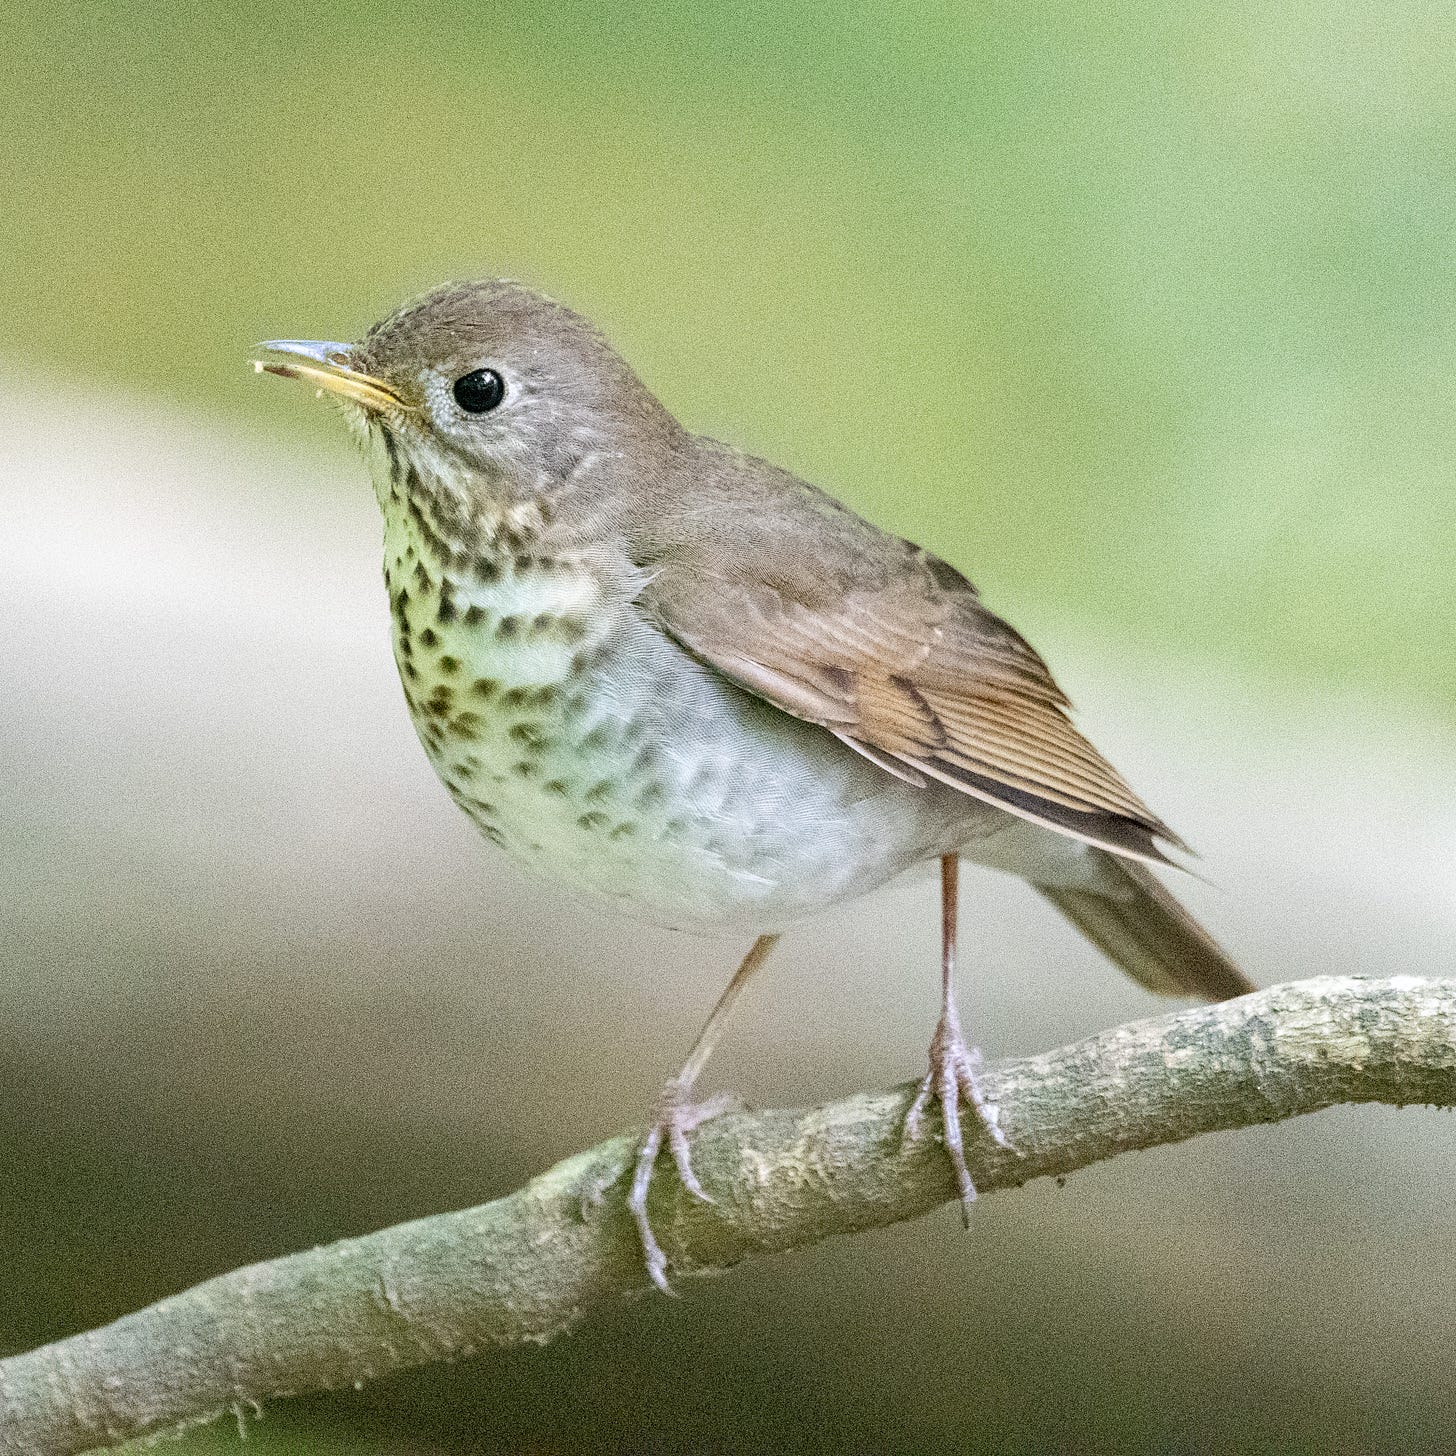 A Bicknell's thrush perched on a branch, leaning forward